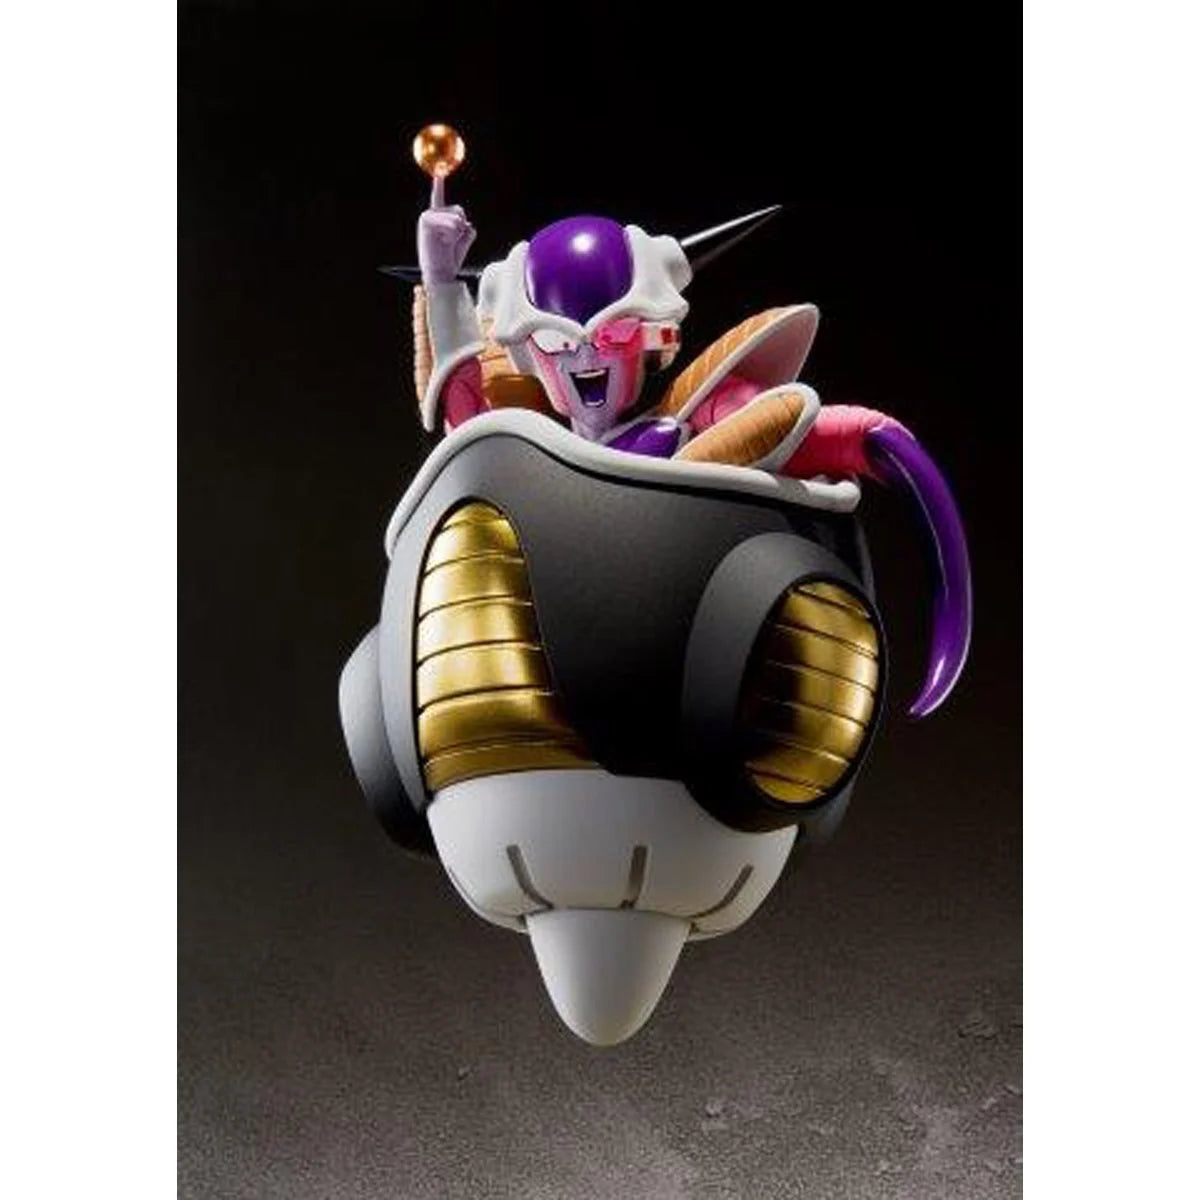 Dragon Ball Z Frieza First Form and Pod Set by S.H.Figuarts -SH Figuarts - India - www.superherotoystore.com